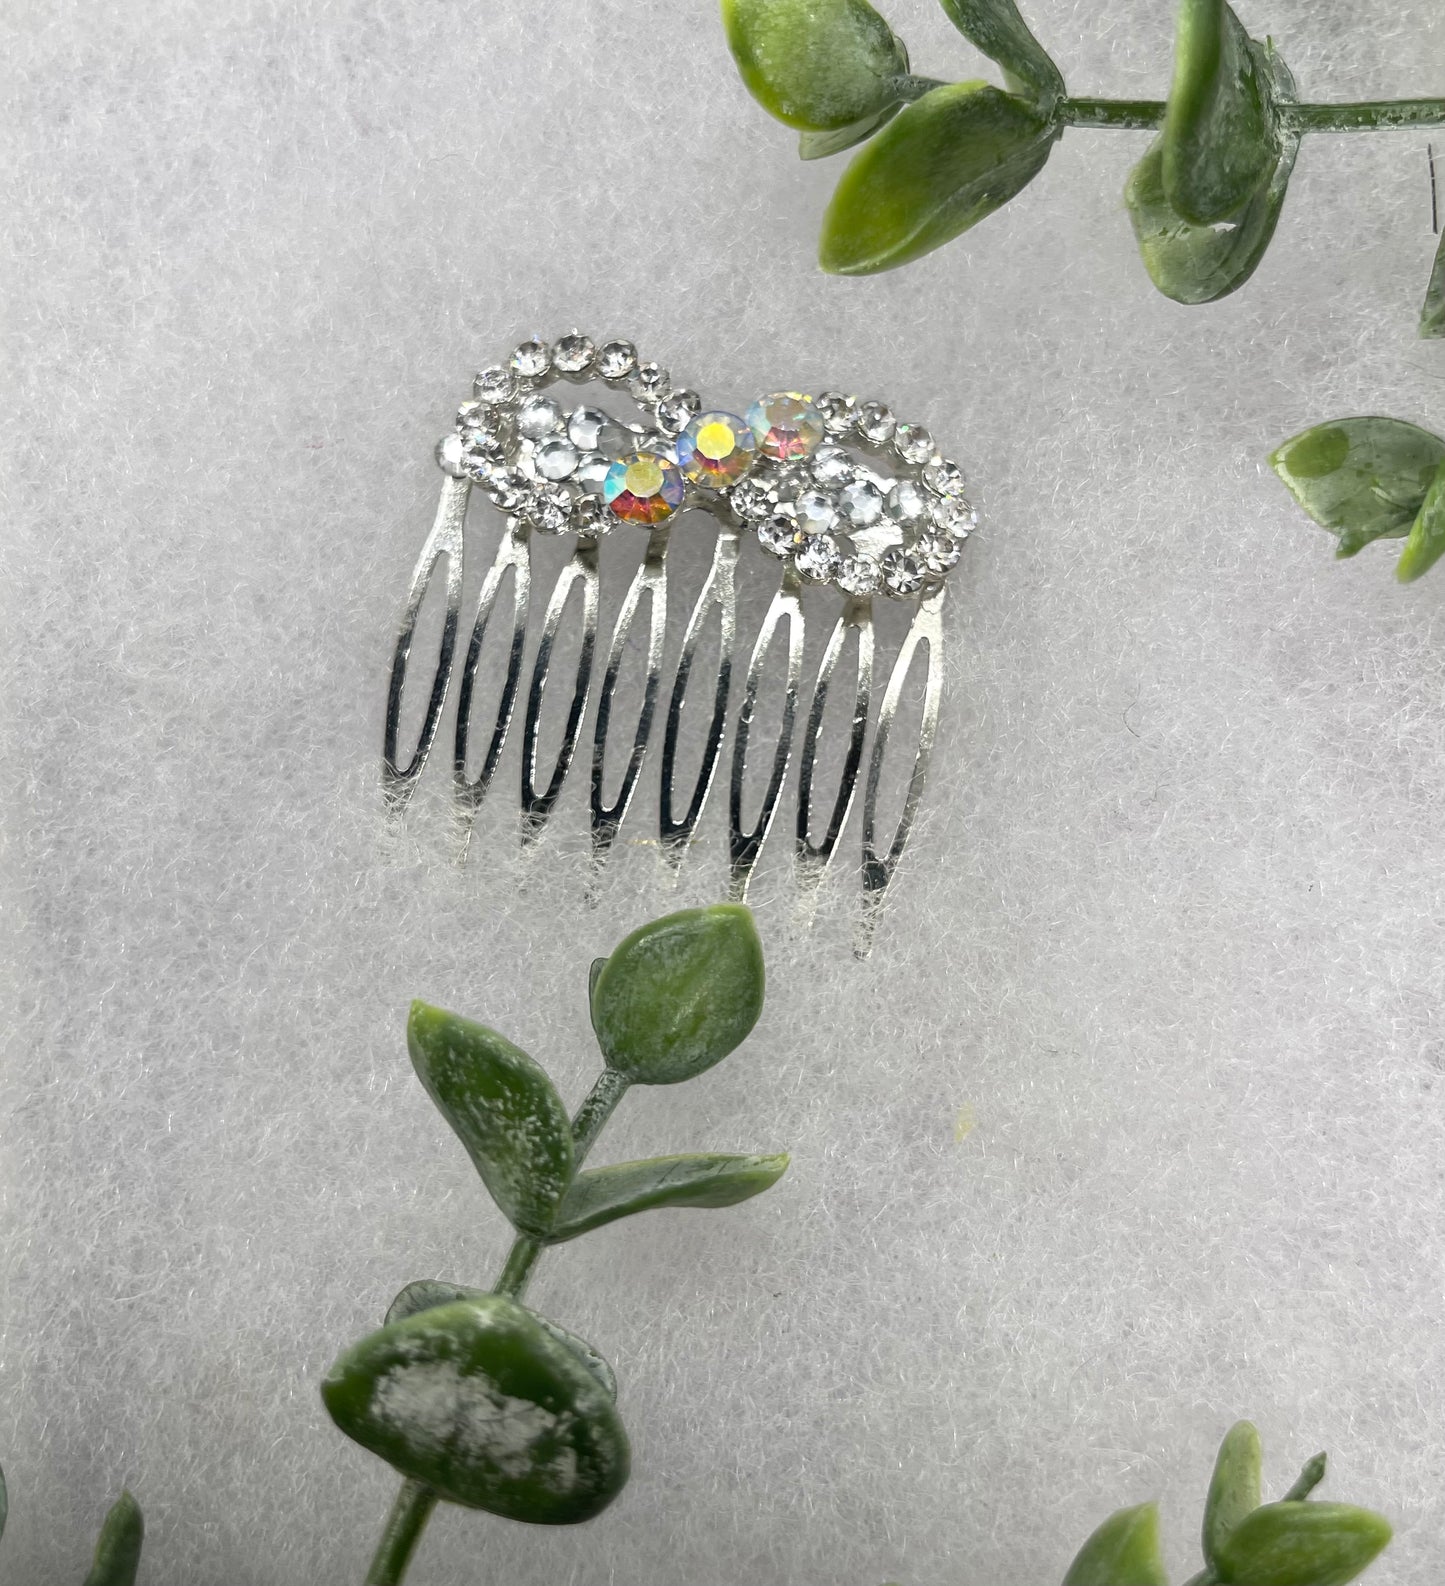 iridescent crystal rhinestone side Comb approximately 2.0”silver tone formal hair accessory gift wedding bridal Hair accessory #167